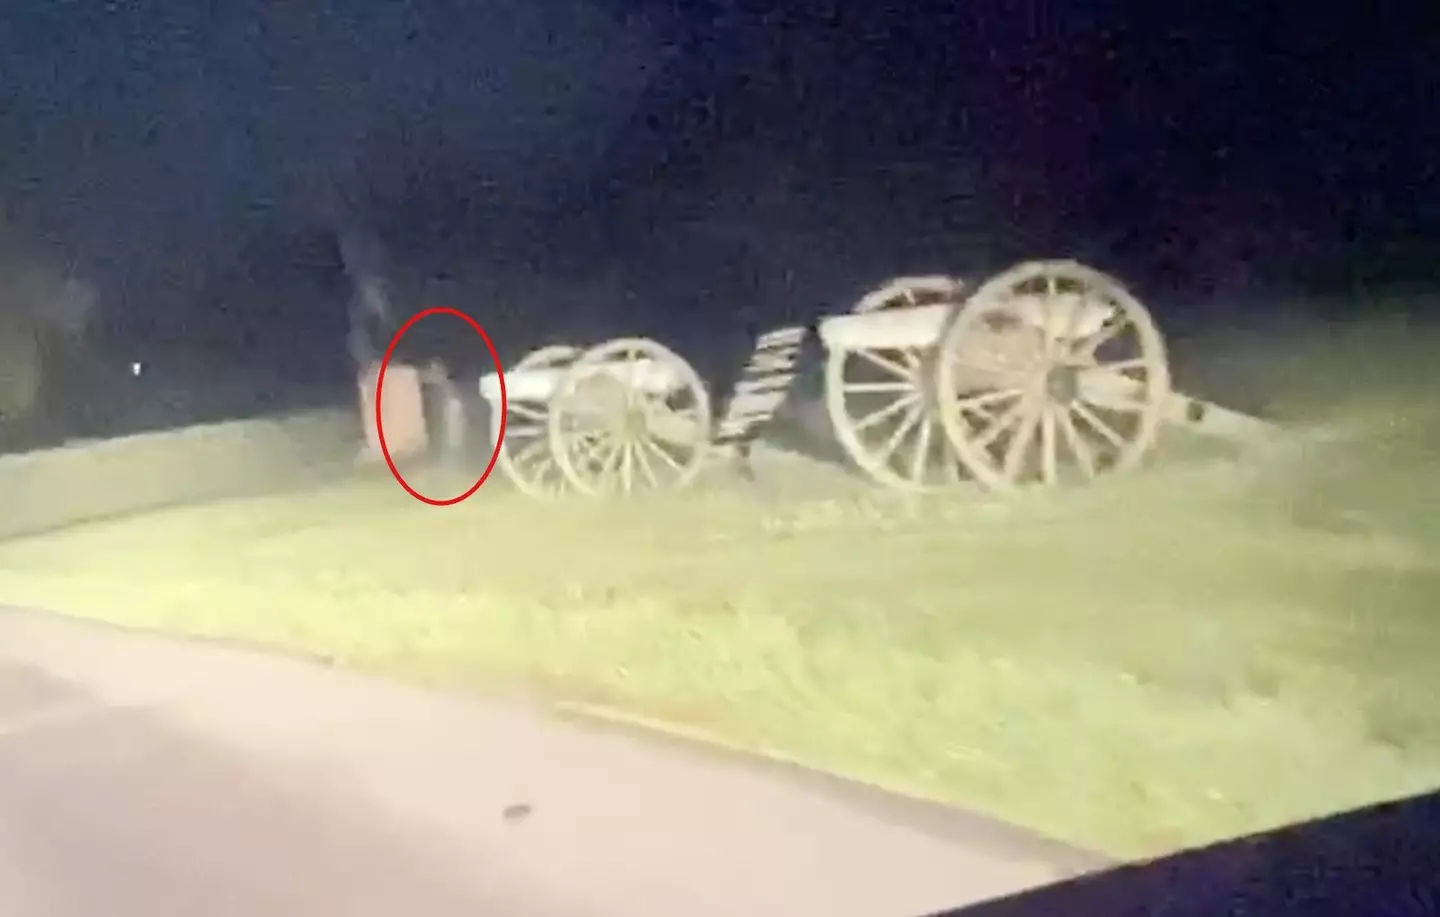 One of the 'ghosts' was spotted walking by the cannons.